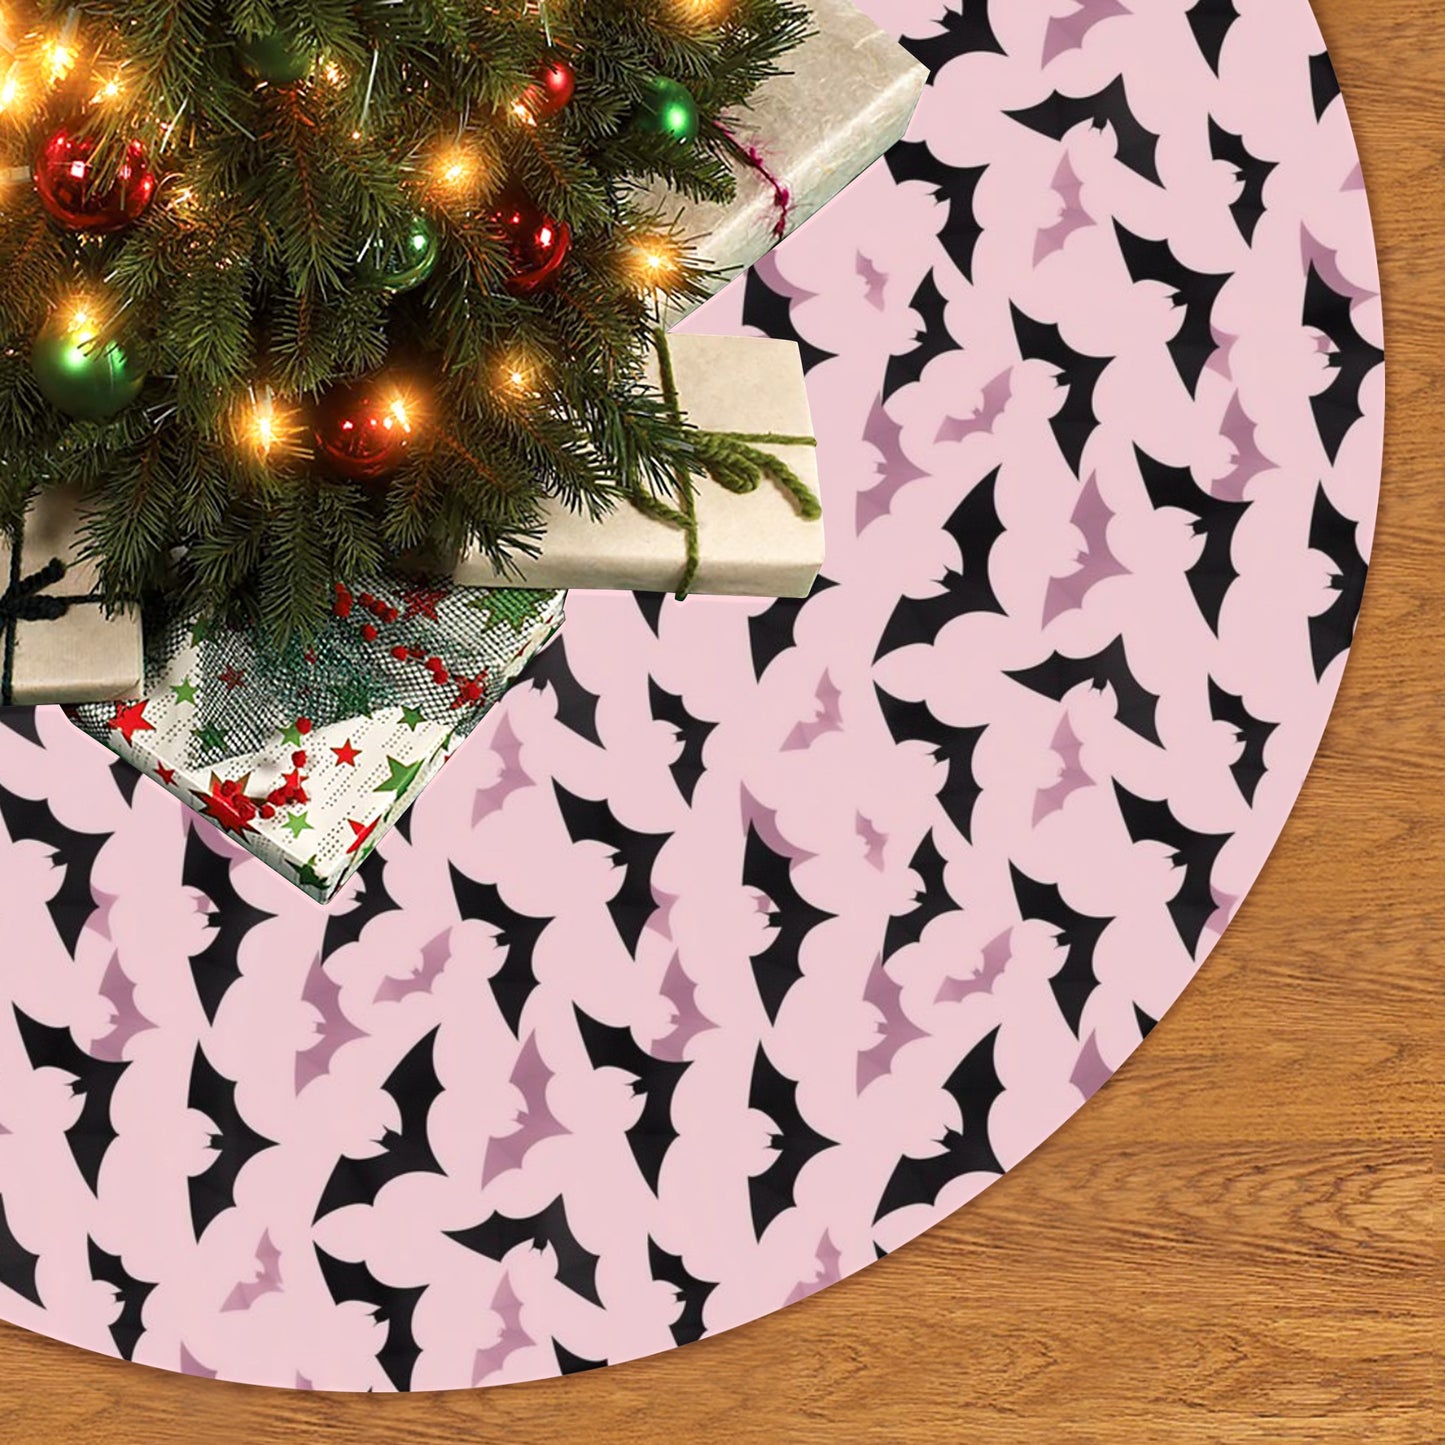 Bats Halloween Tree Skirt, Pink Goth Christmas Xmas Spooky Cover Decor Decoration All Hallows Eve Creepy 30 36 48 Inch Small Large Party Starcove Fashion